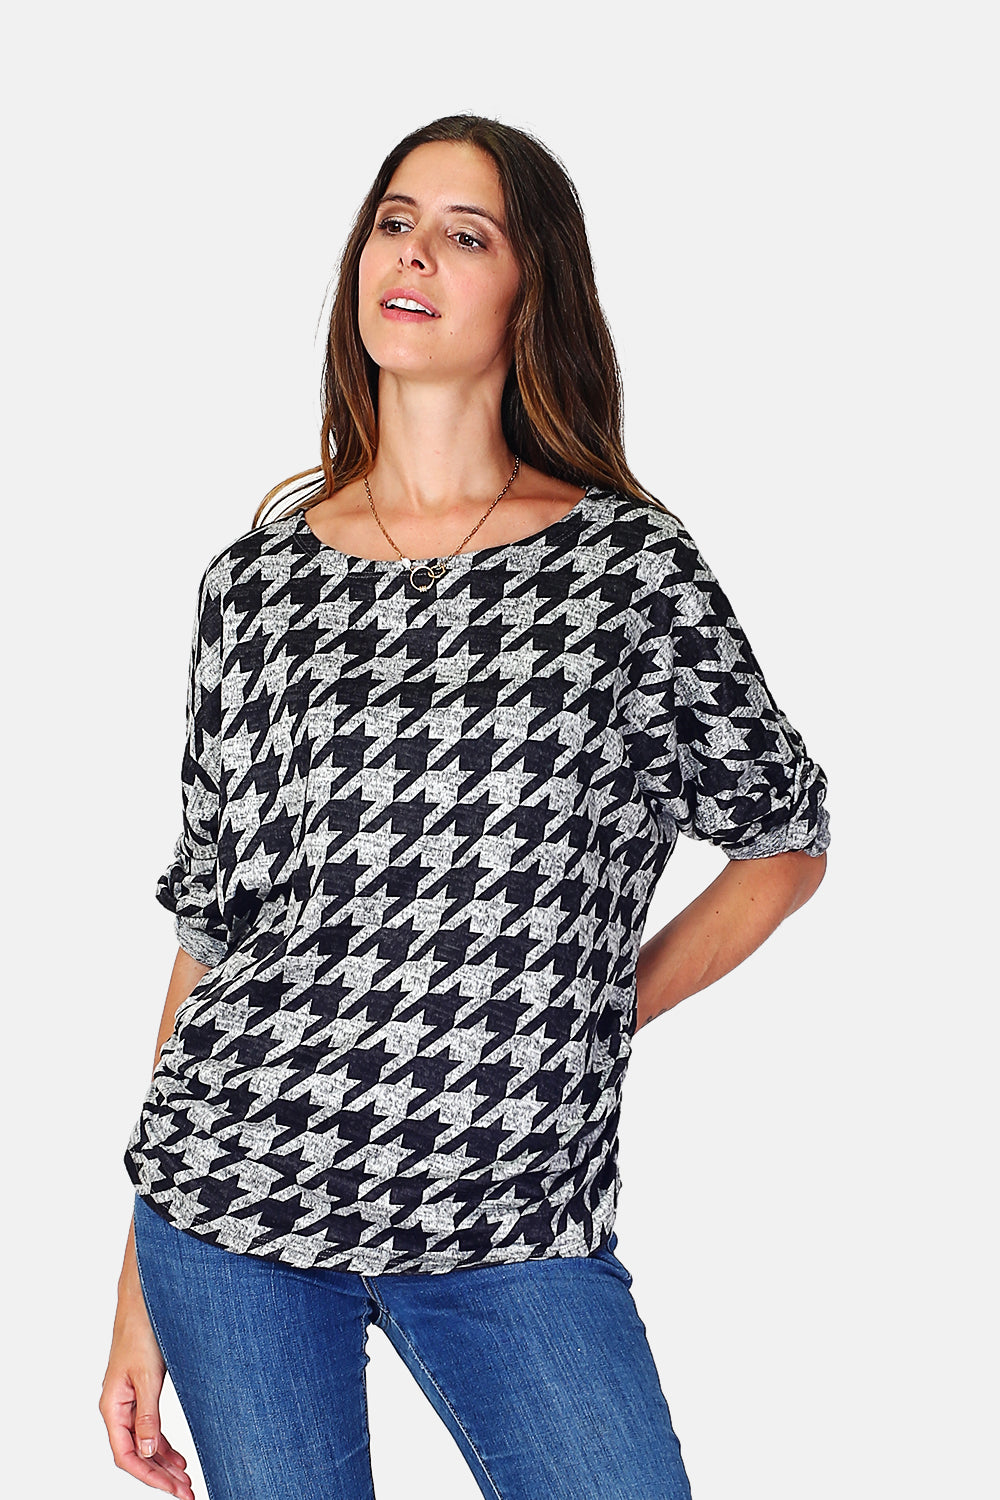 Crew neck jumper with houndstooth imp length sleeves